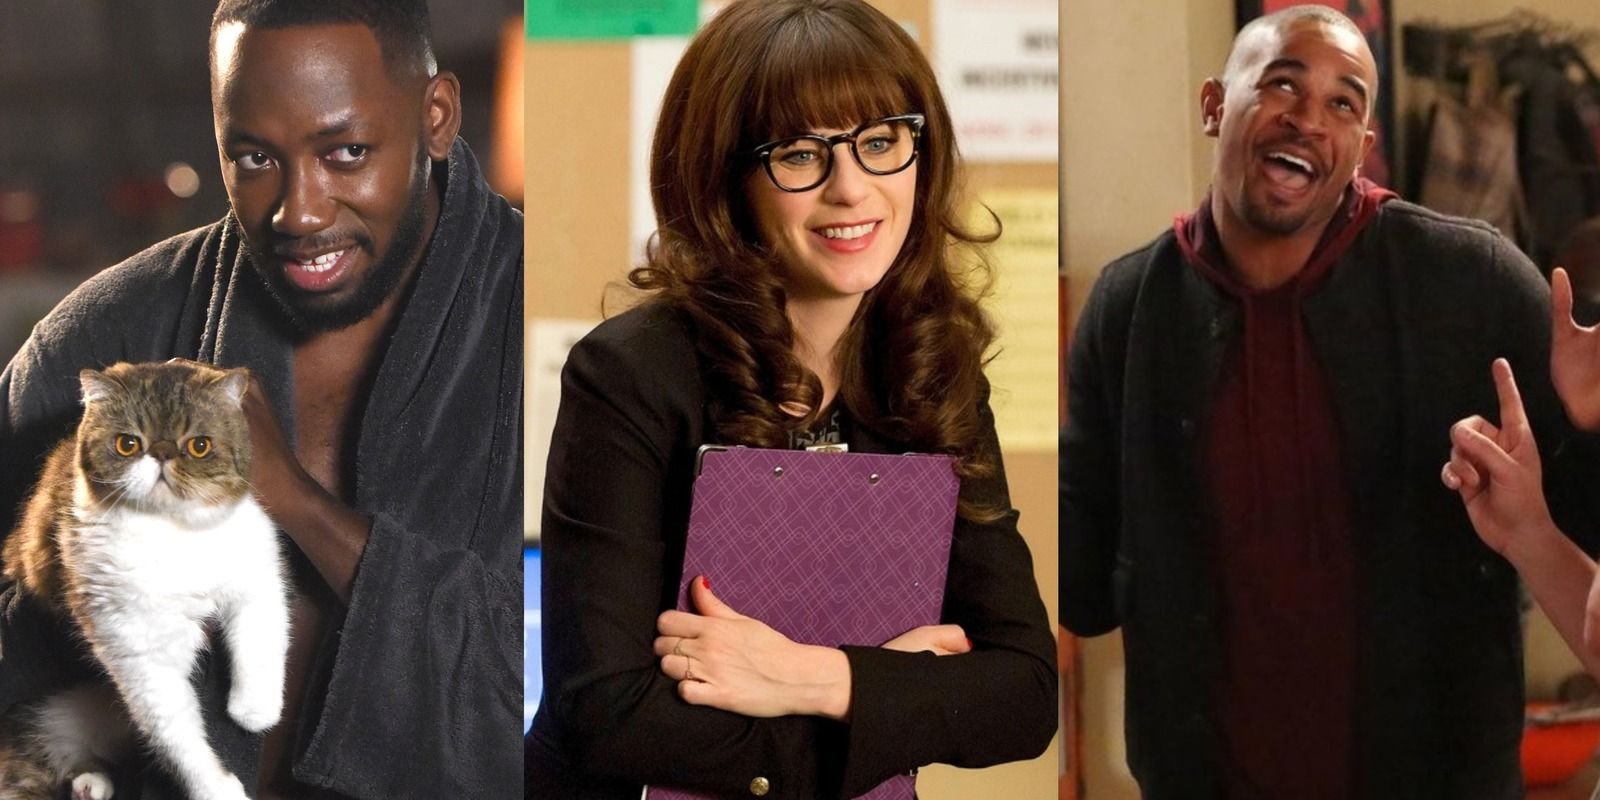 New Girl 10 Storylines The Show Dropped